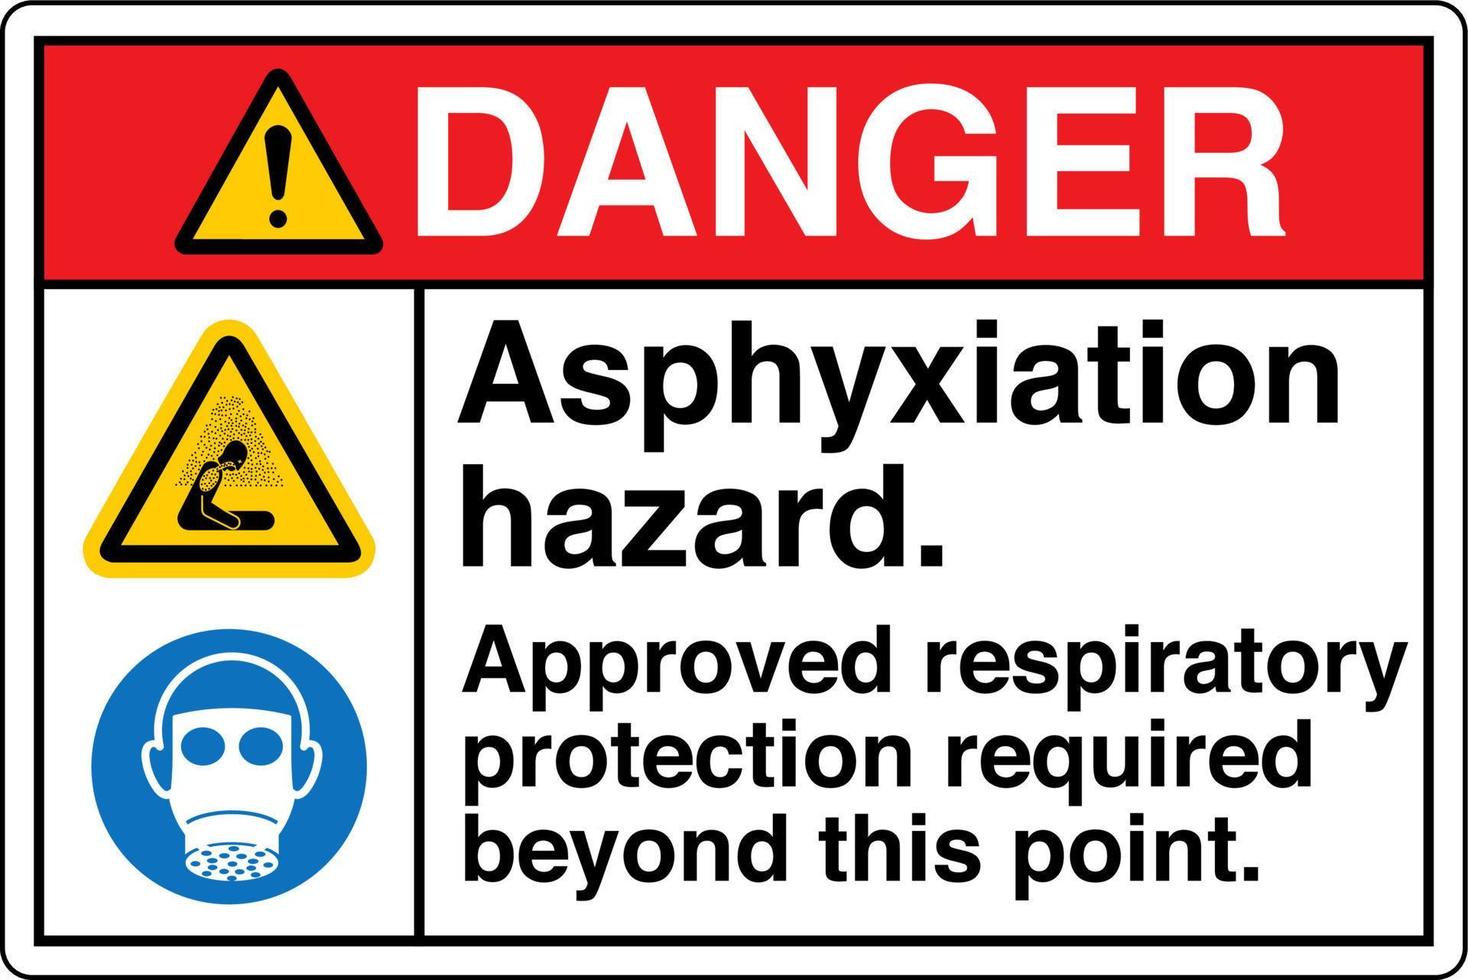 Safety Sign Marking Label Symbol Pictogram Danger Asphyxiation hazard Approved respiratory protection required beyond this point vector